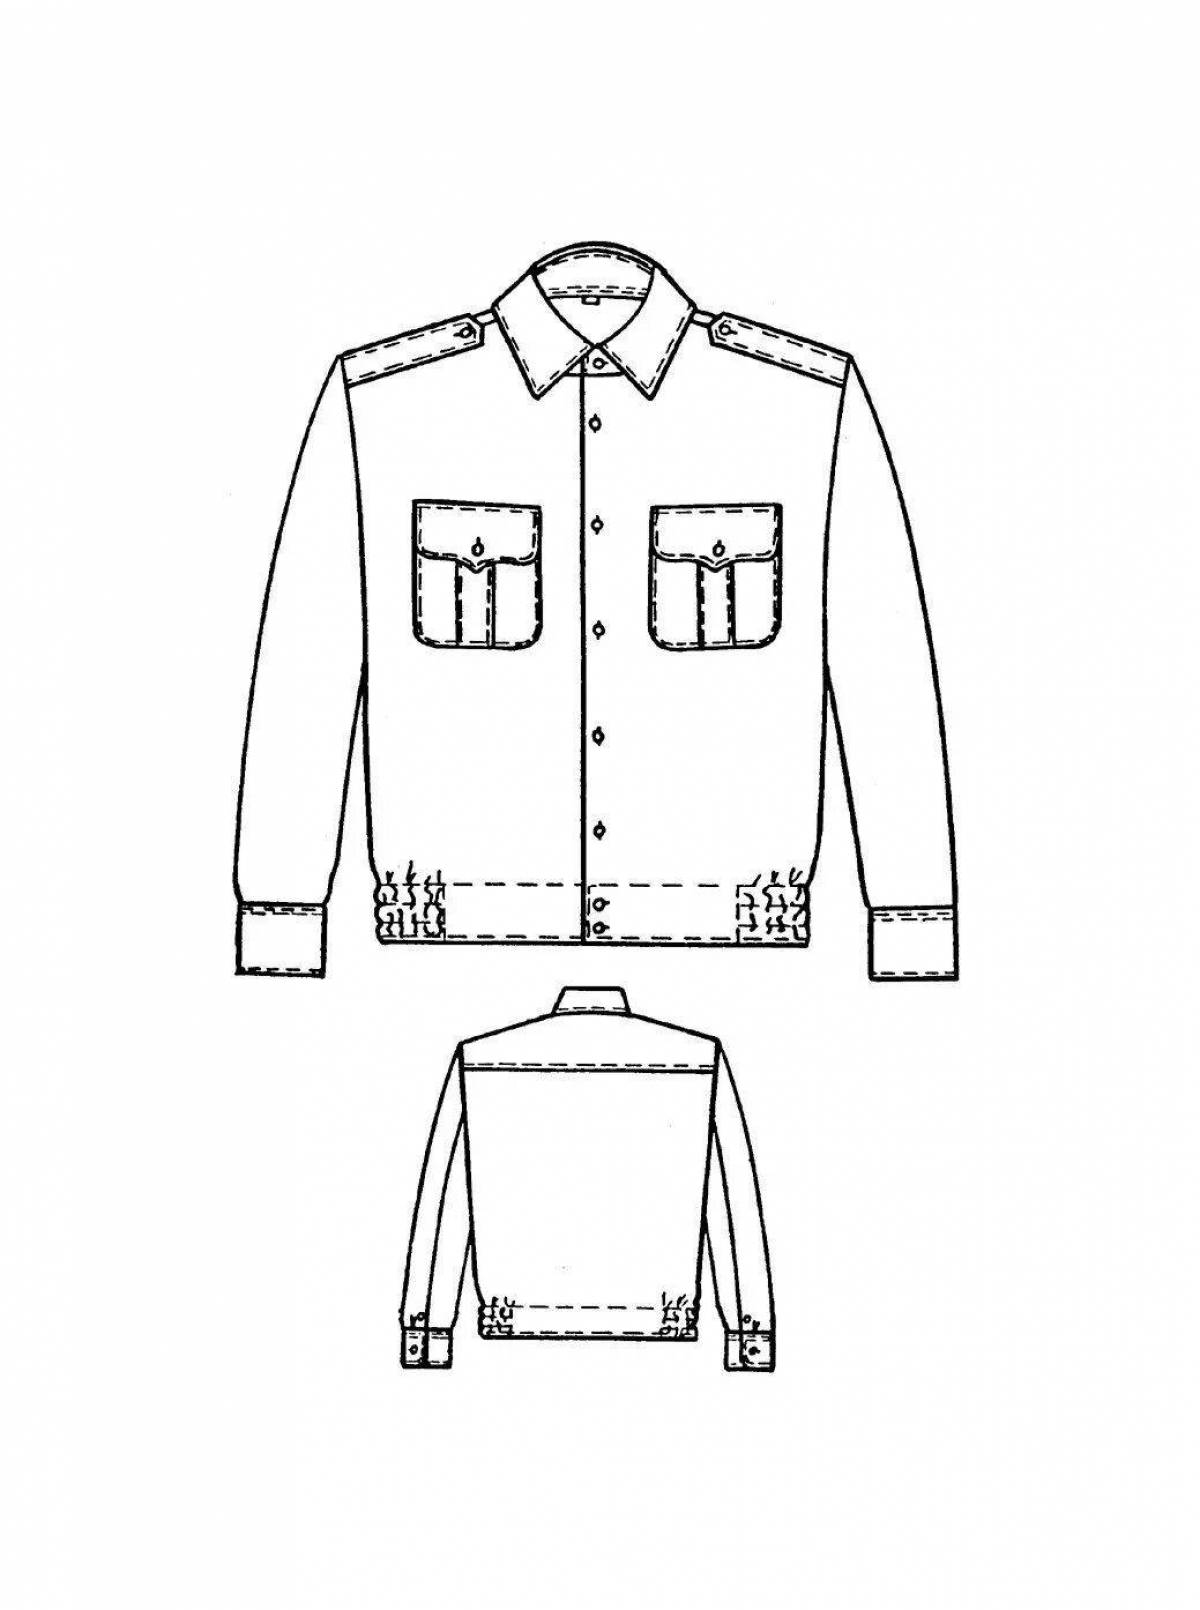 Detailed military uniform coloring page